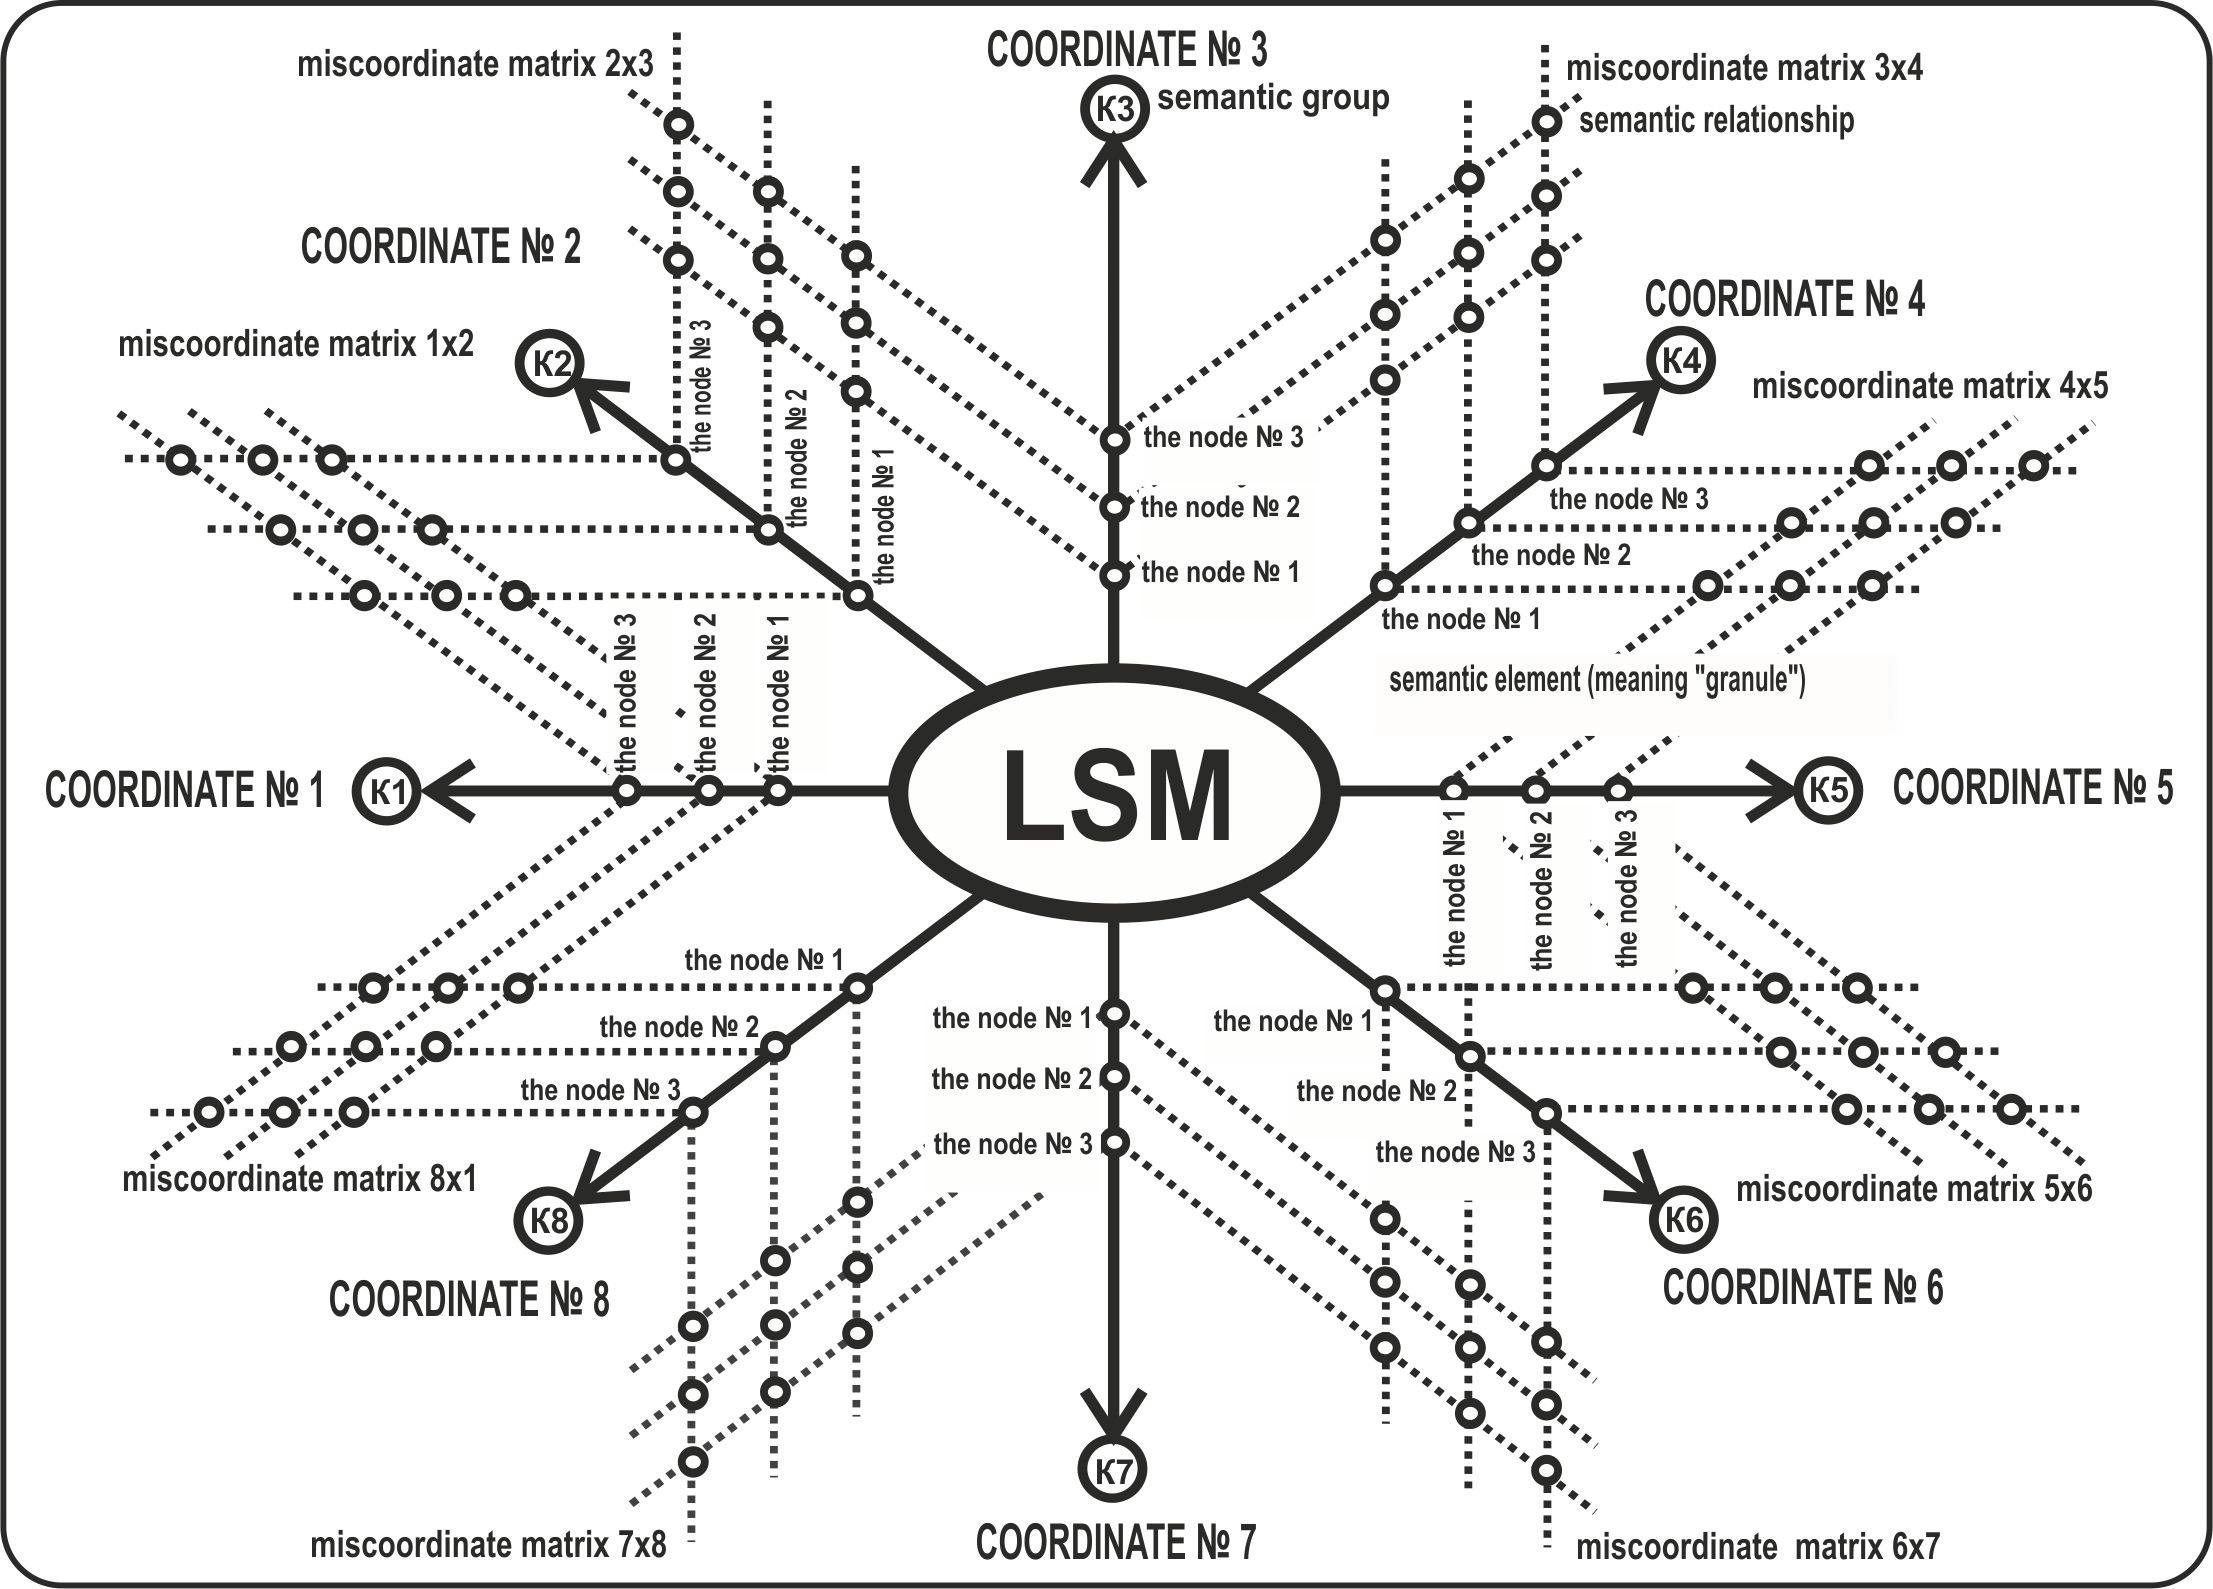 Coordinating matrix framework of LSM (Note: non-adjacent inter-coordinate matrices are shown
      next to the model)